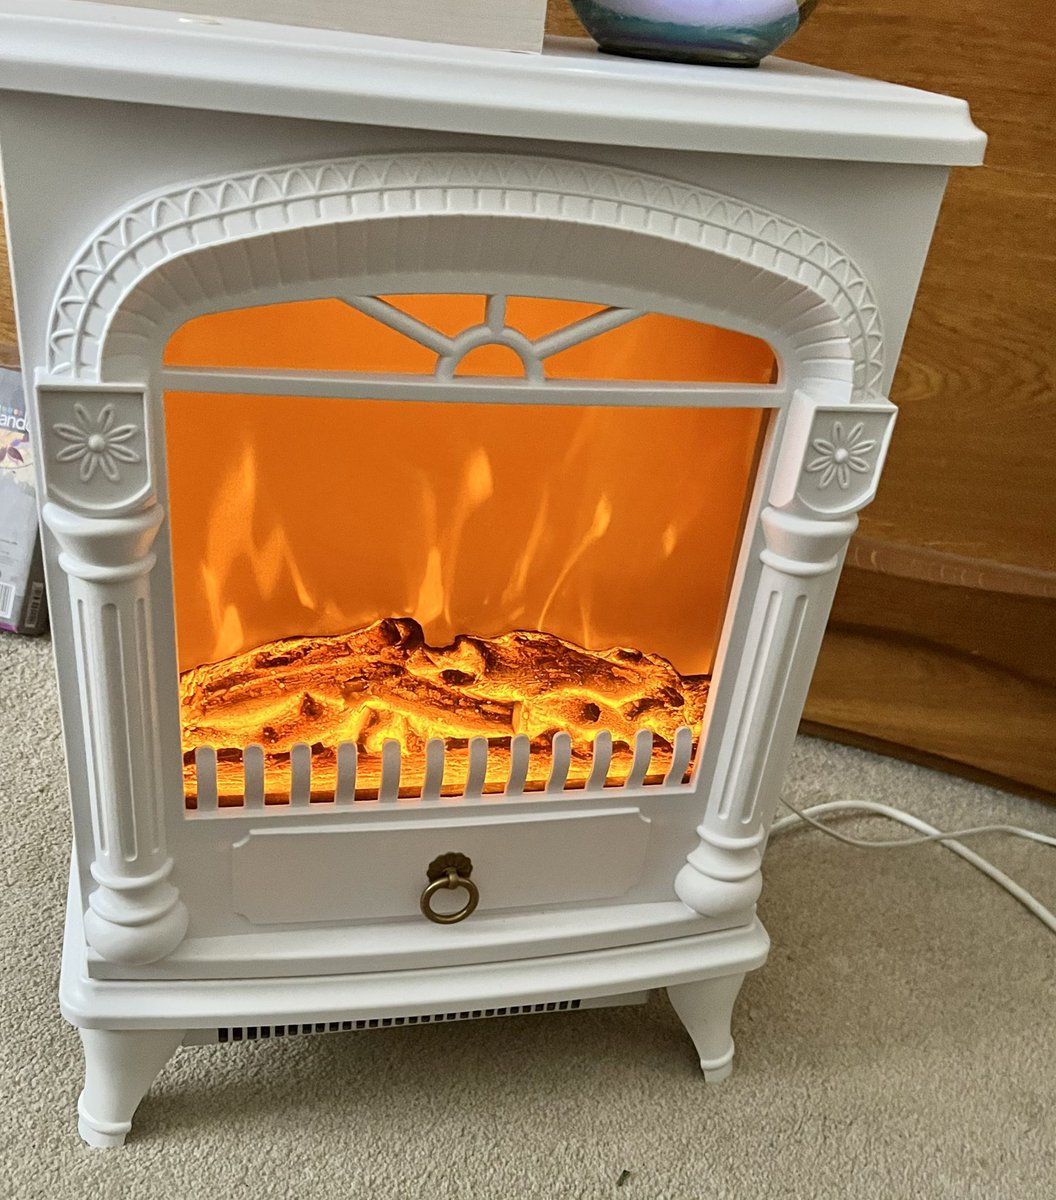 The £35 electric fire heater I got from Lidl has definitely paid for itself…..